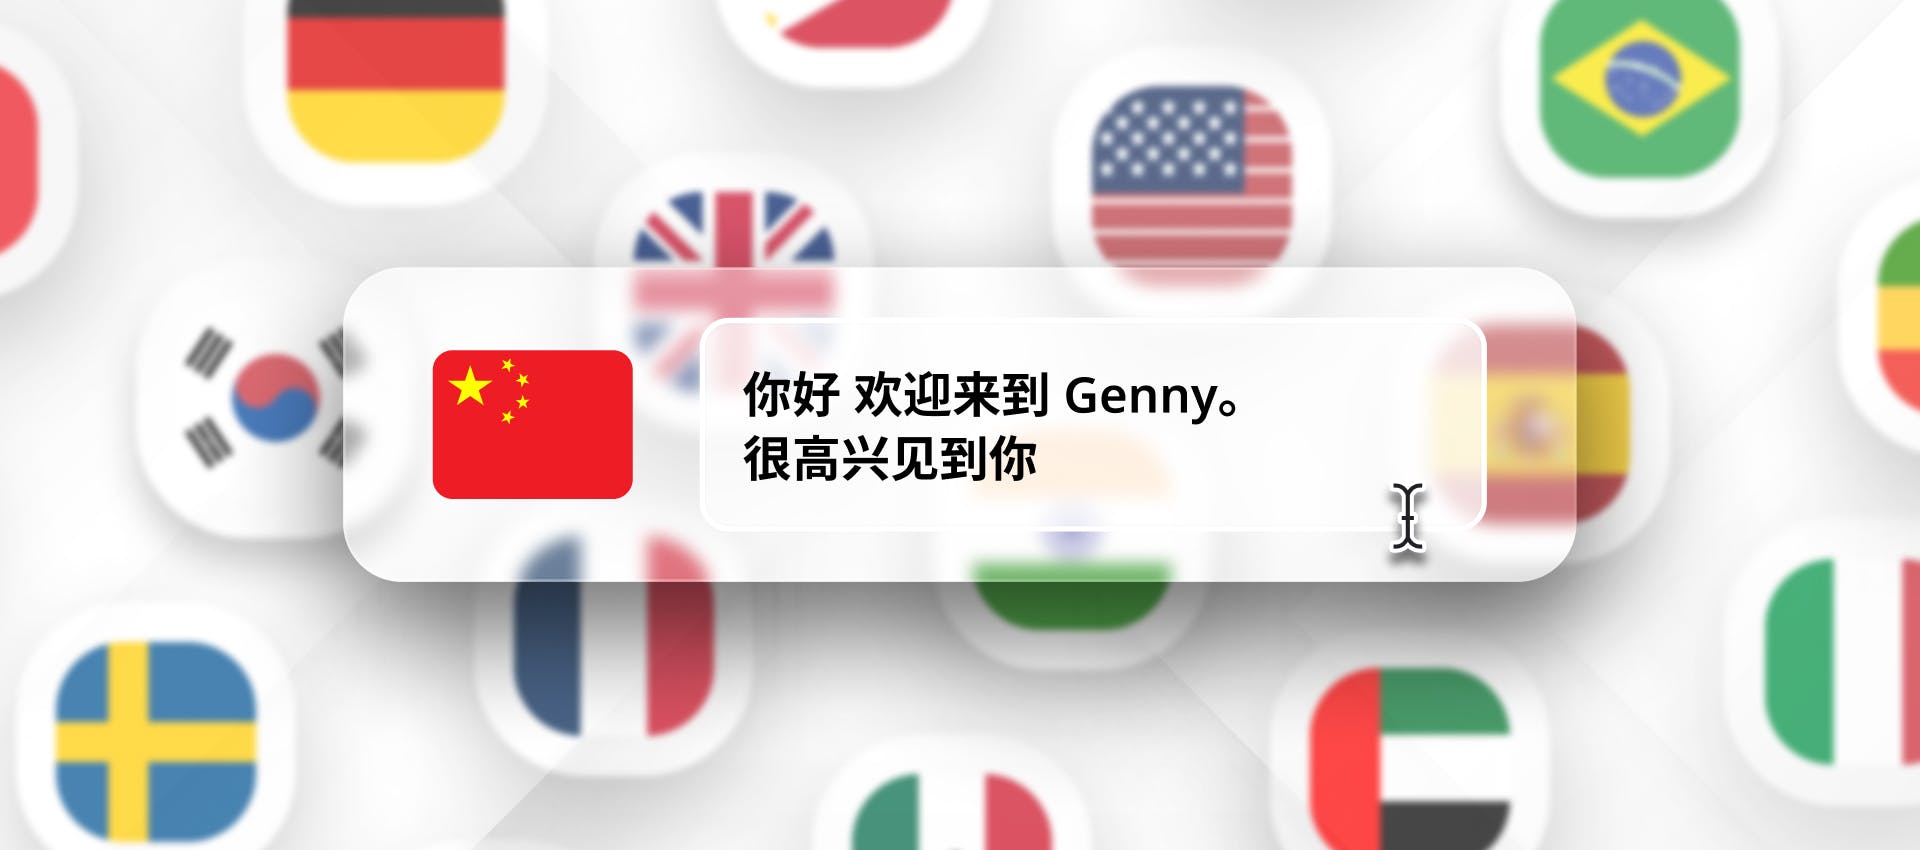 Mandarin Chinese phrase for TTS generation with different flags in the background